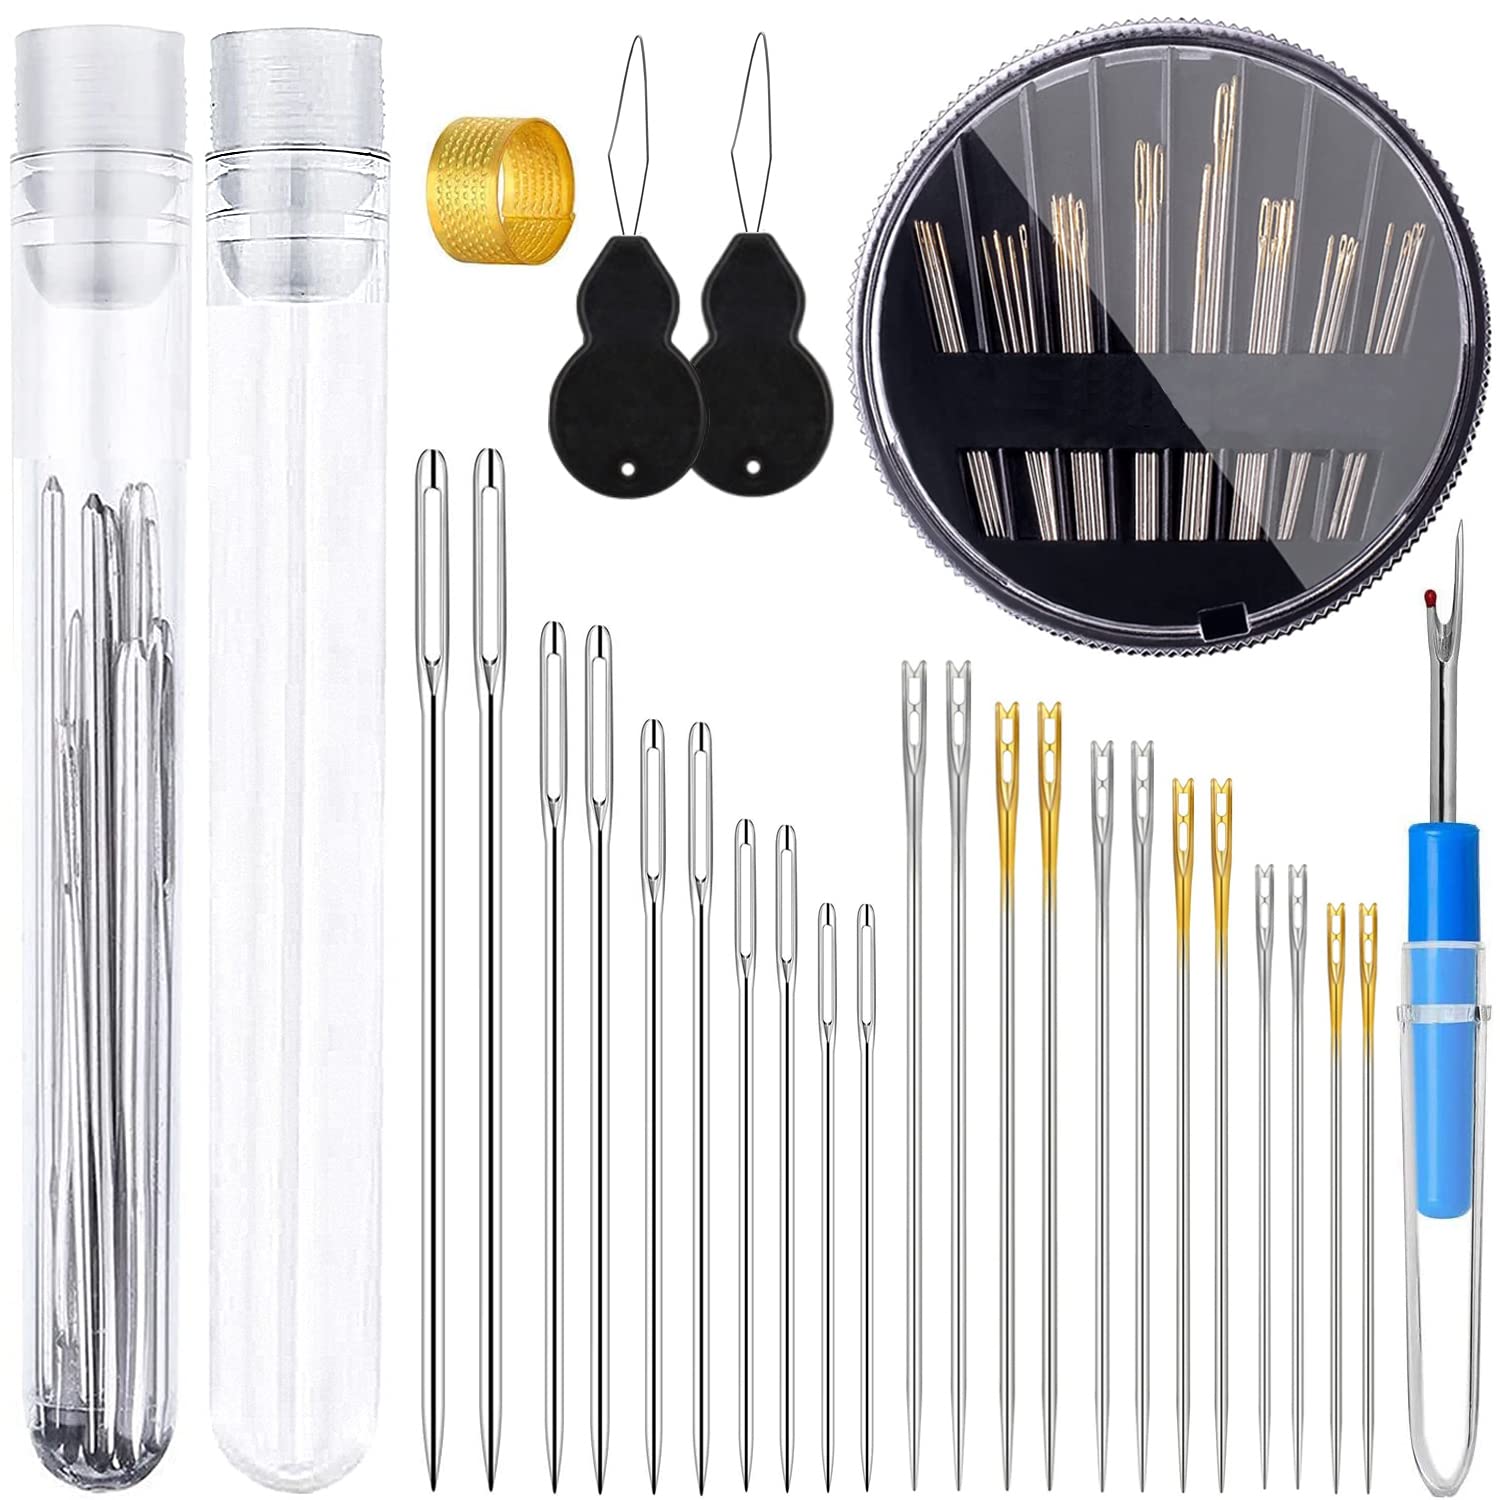 Hand Sewing Needle 30pcs Eye Embroidery Cross Stitch Needles With Threaders  Kit